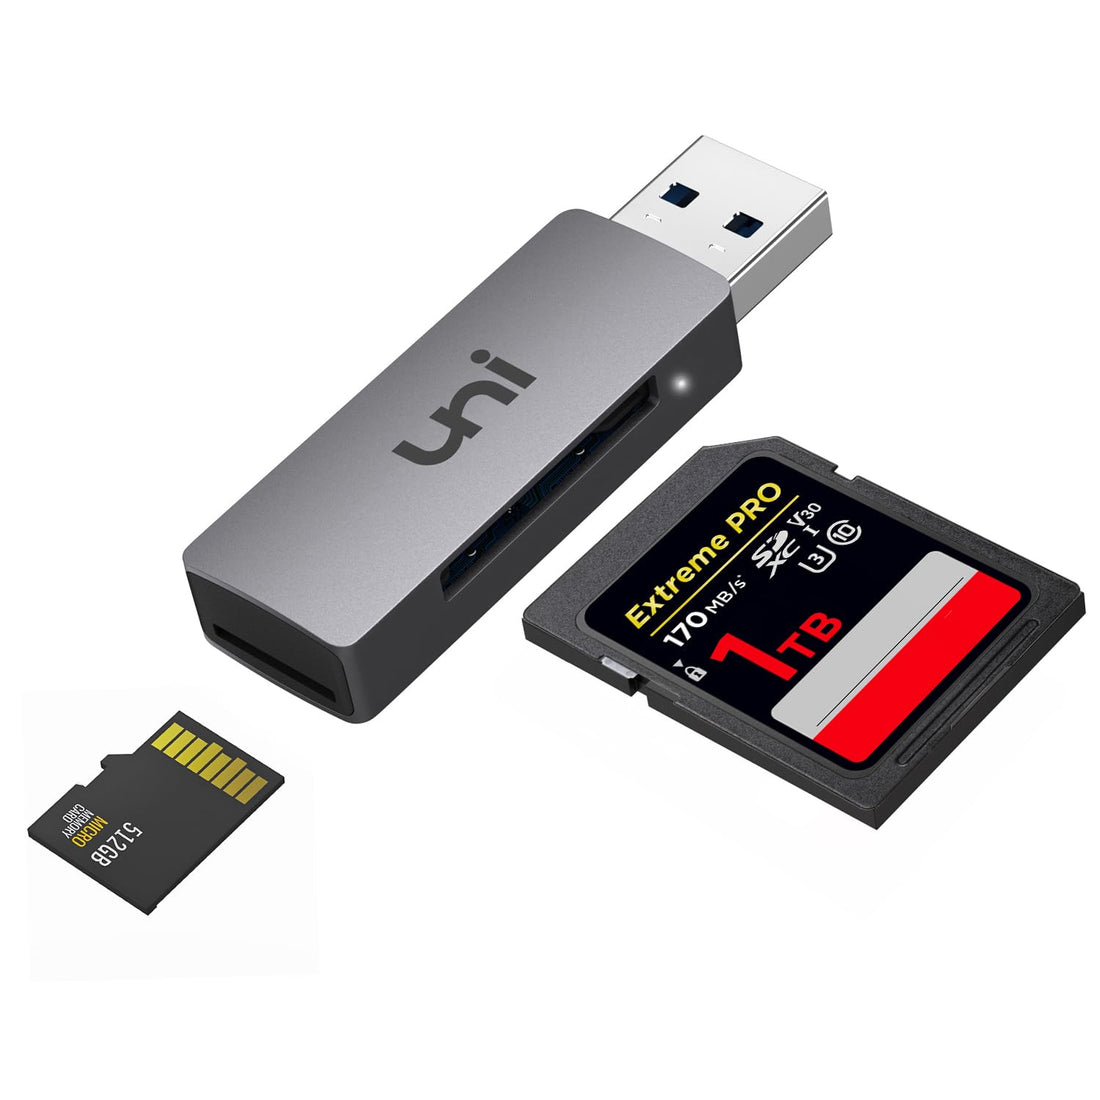 SD Card Reader, uni USB 3.0 to SD/Micro SD Card Adapter 2-in-1, Aluminum USB SD/TF Memory Card Reader for SD, SDXC, SDHC, MMC, RS-MMC, Micro SDXC, Micro SD, Micro SDHC Card and UHS-I Cards